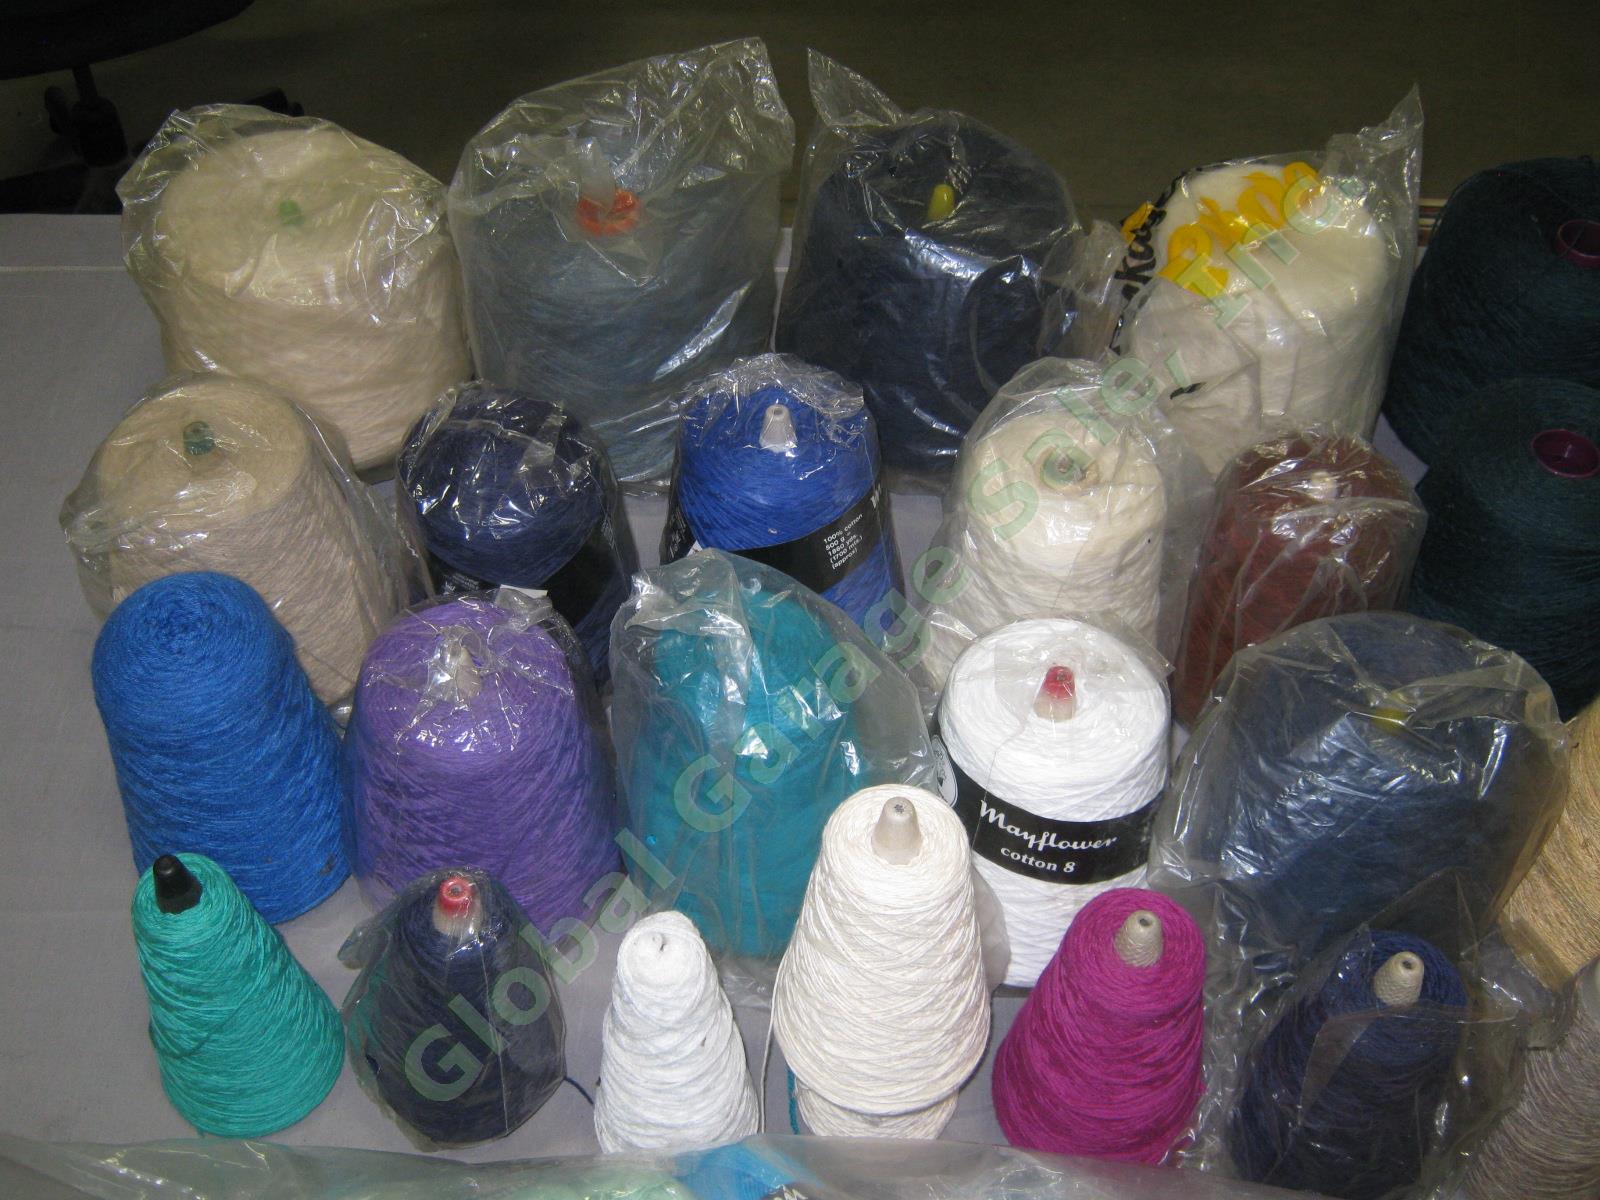 HUGE KNITTING YARN LOT Assorted Colors 1lb 2lb 3lb Wool Cotton Cone Skein ~35lbs 4